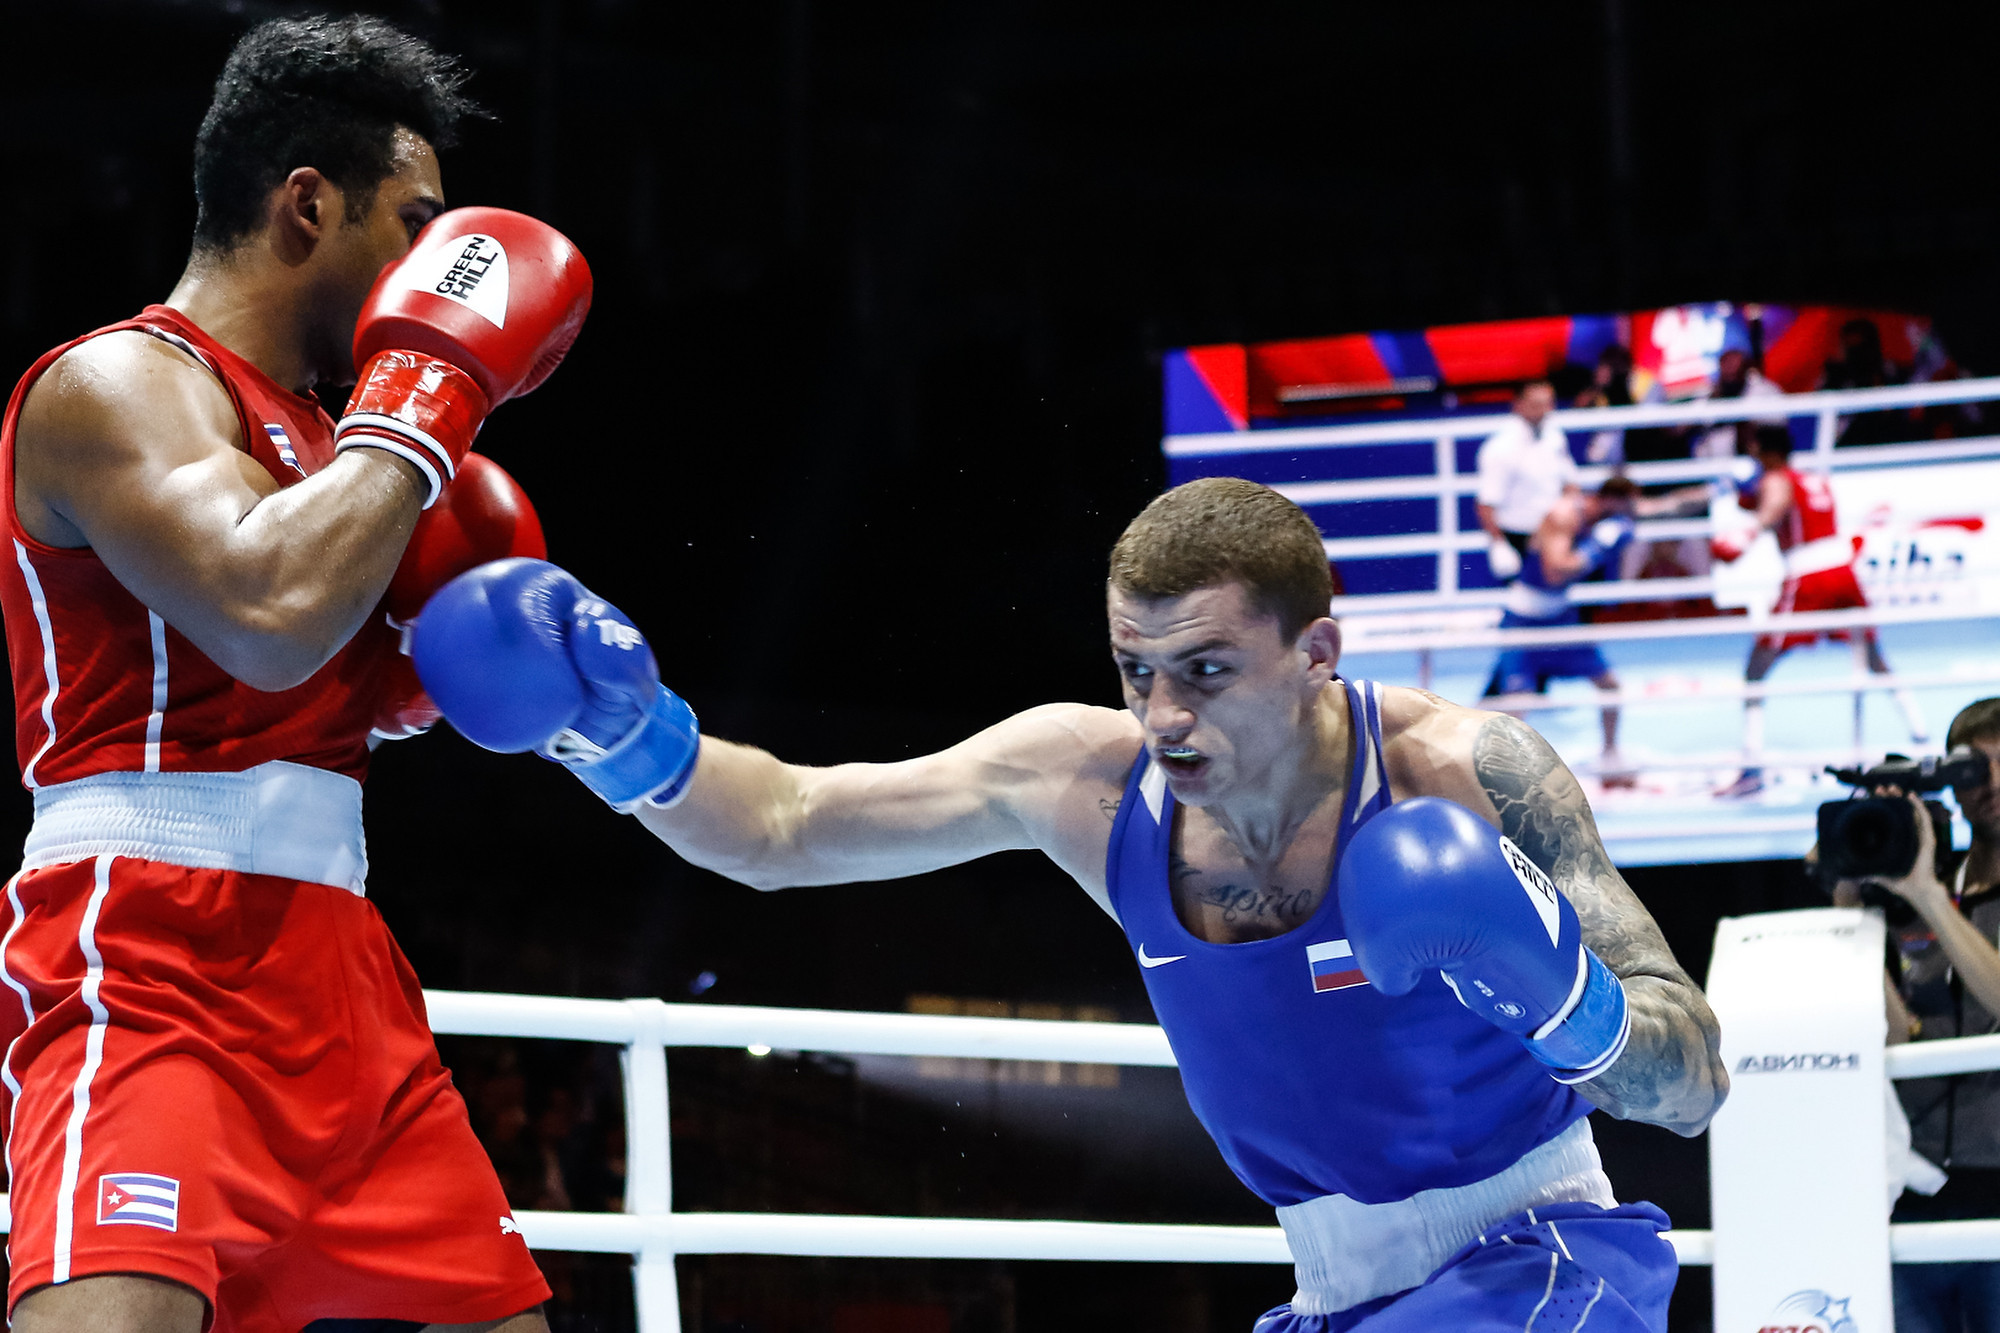 Bakshi delights crowd with shock win at AIBA Men's World Championships